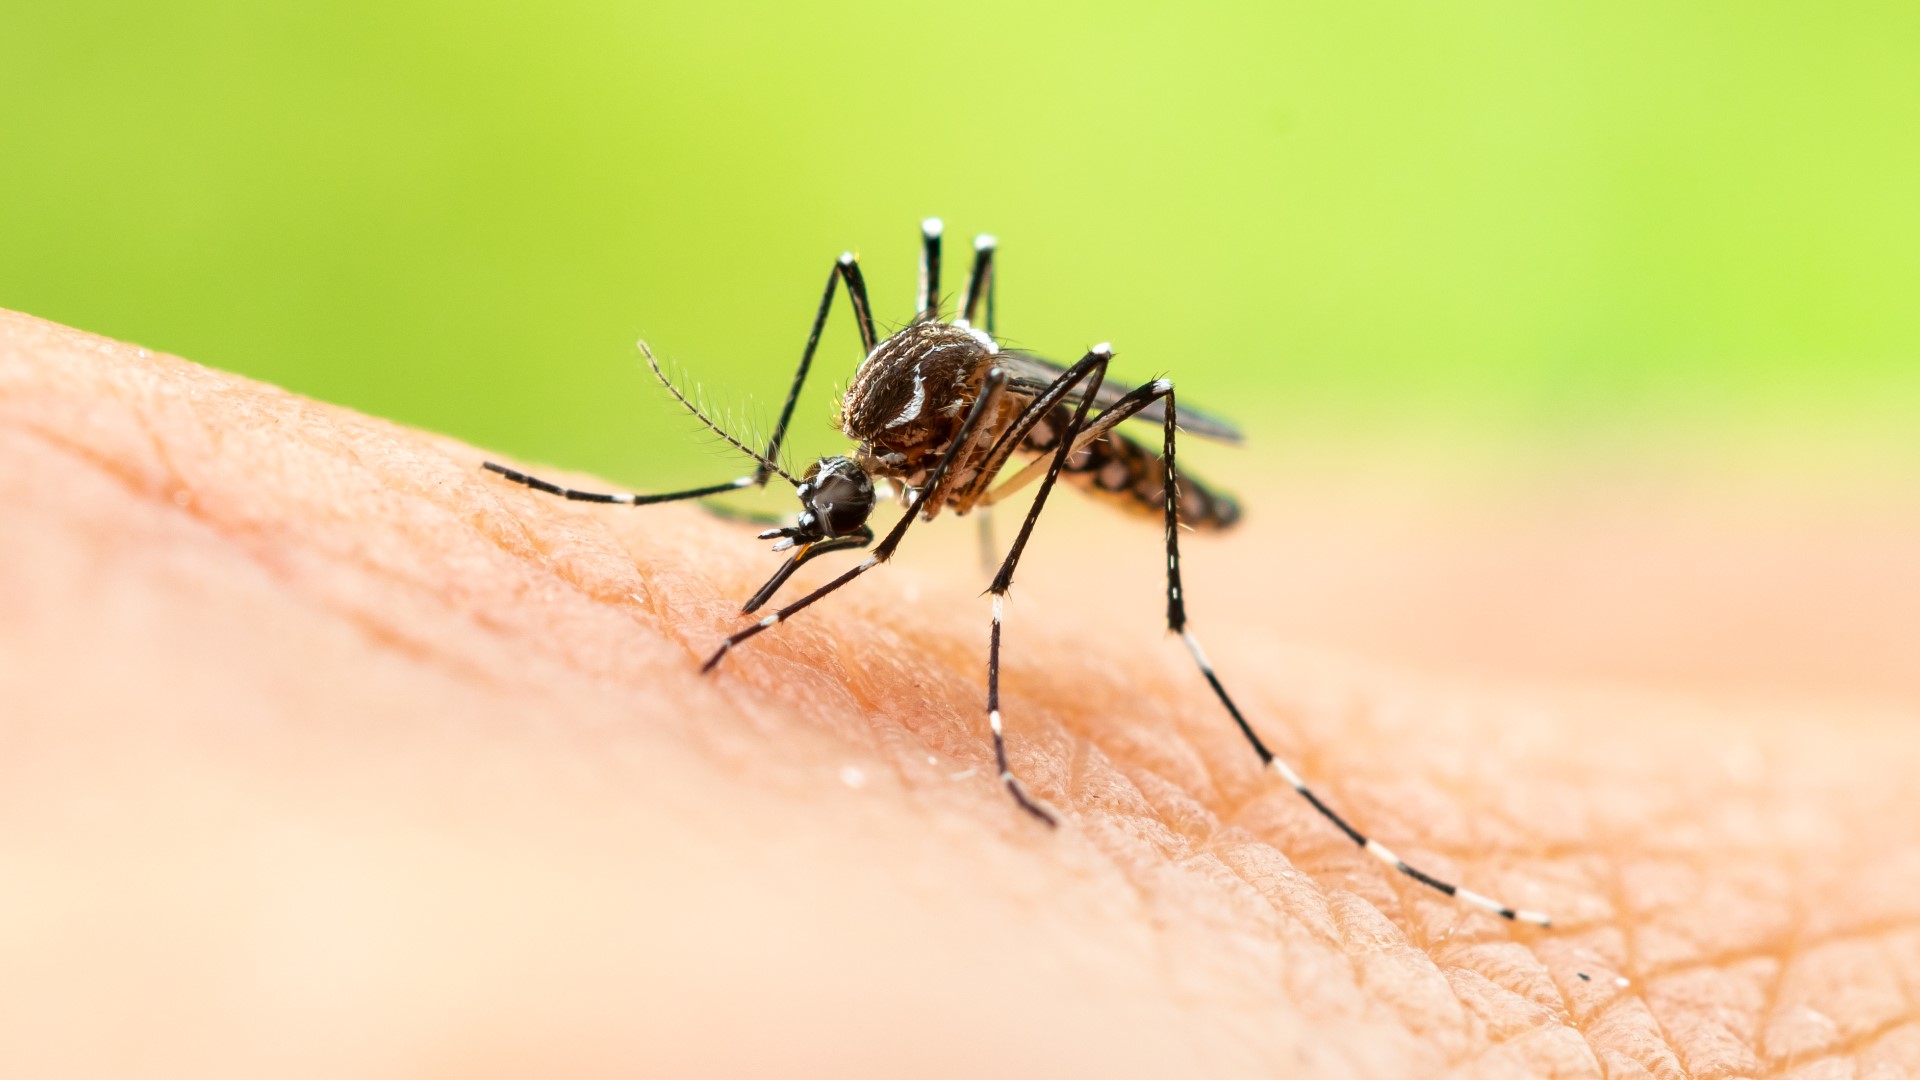 West Nile virus is spread to people through the bite of an infected mosquito.